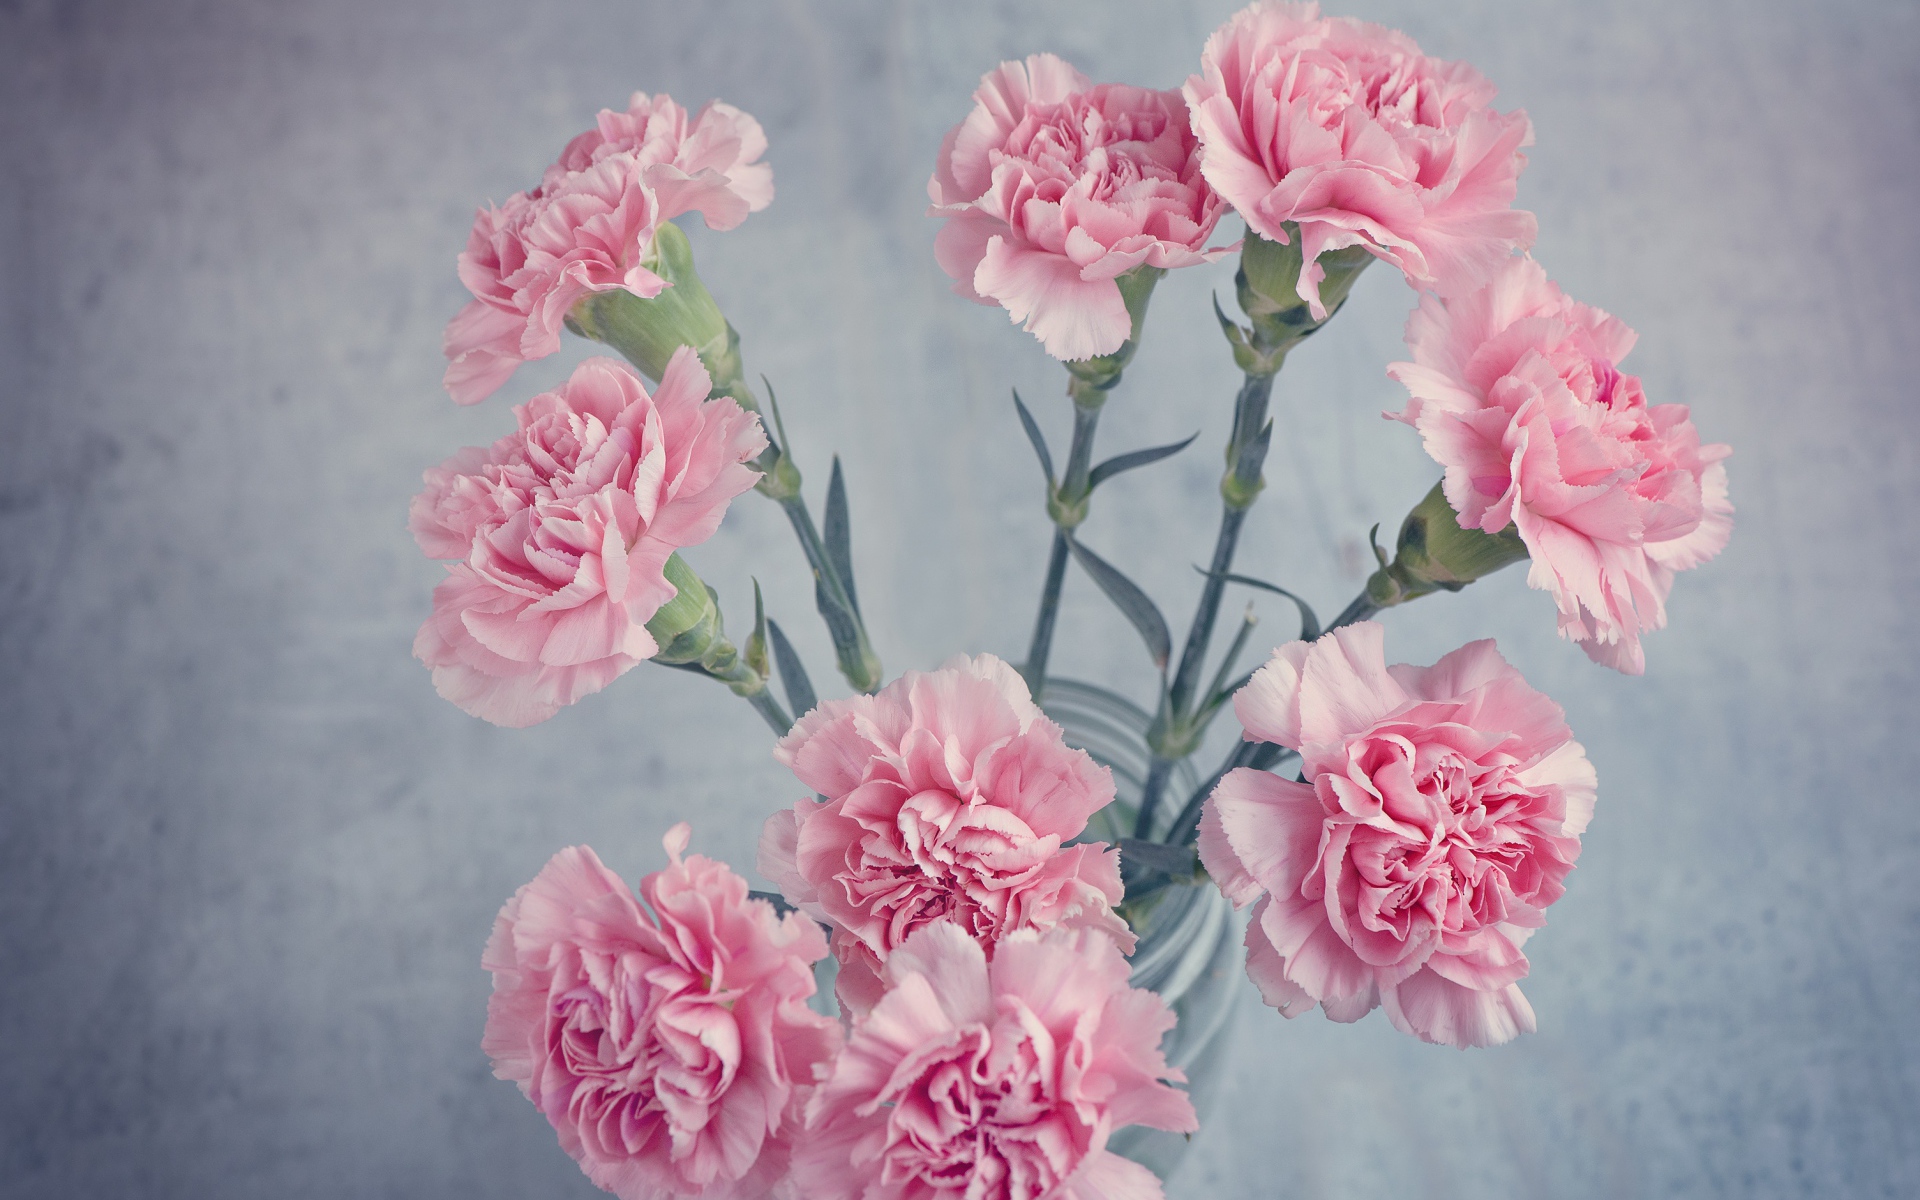 Bouquet of pink carnations in a vase on the table